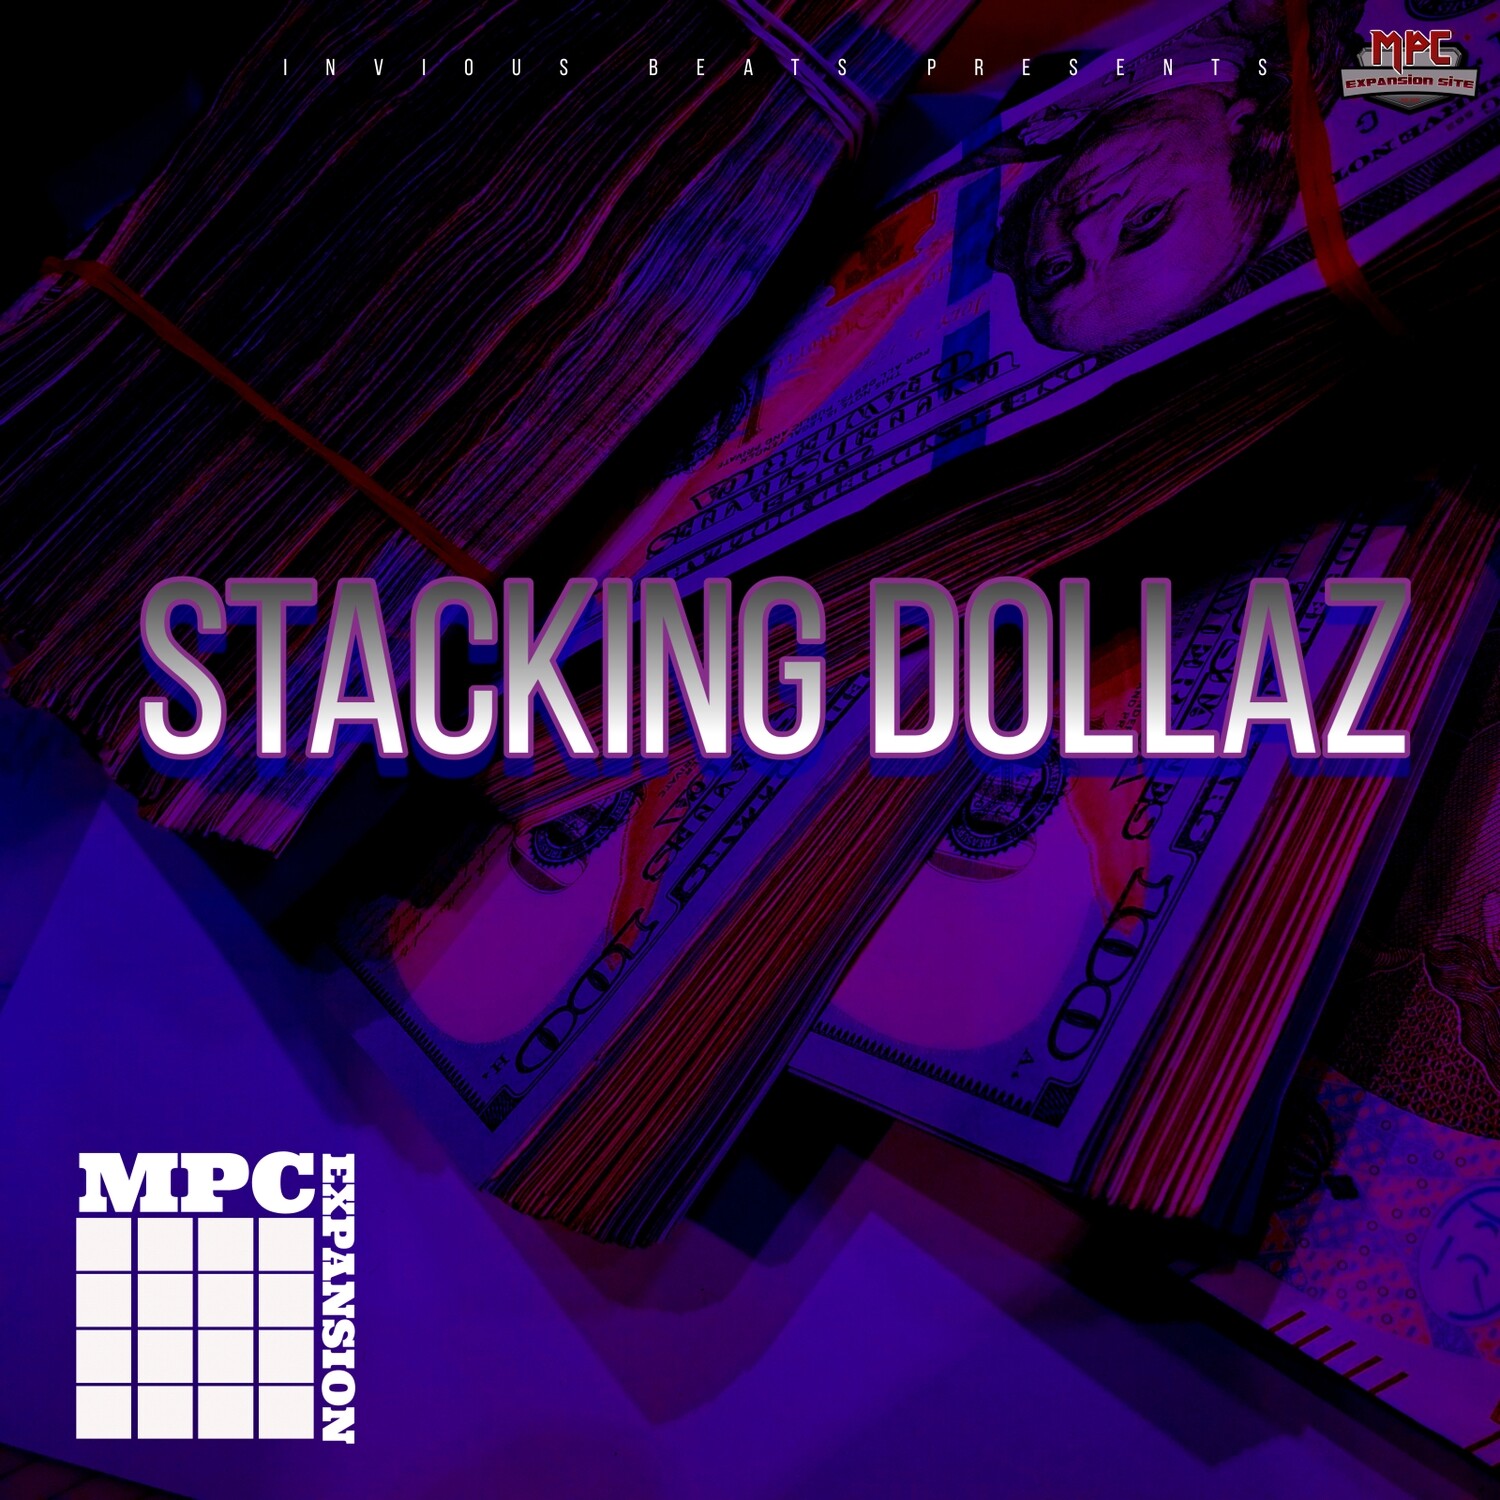 MPC EXPANSION 'STACKING DOLLAZ' by INVIOUS